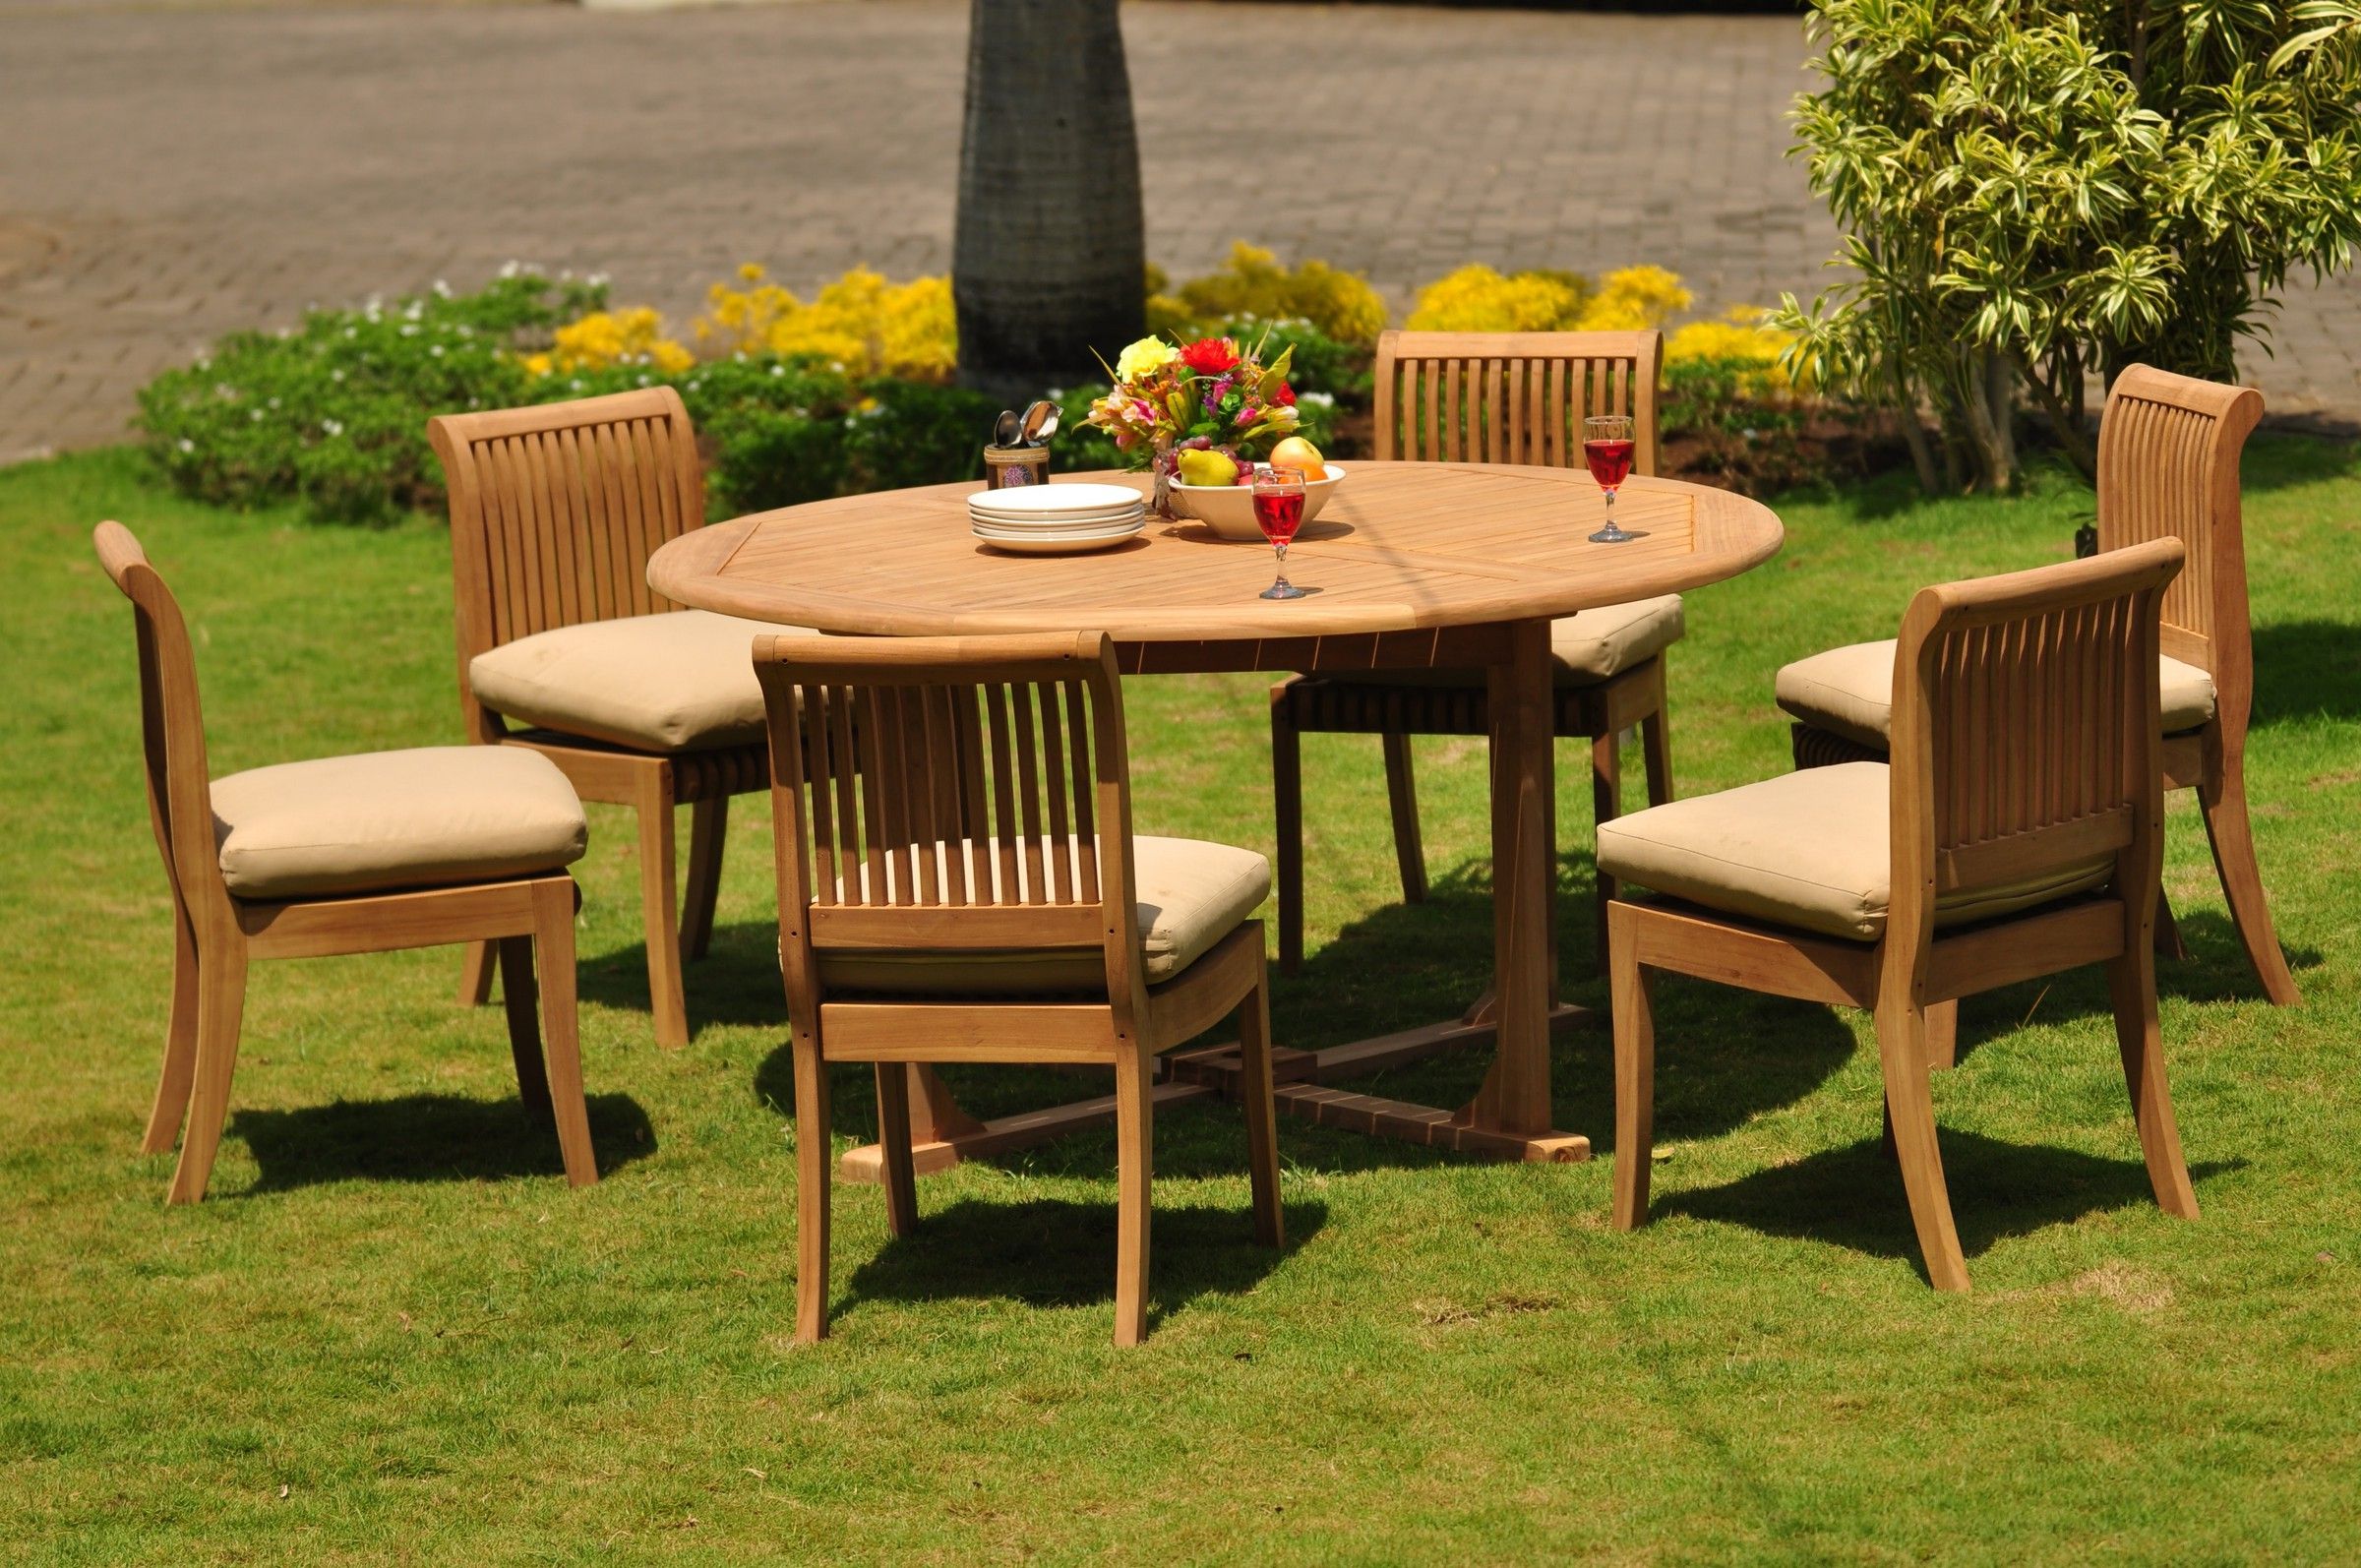 Famous Teak Dining Set: 6 Seater 7 Pc: 60" Round Table And 6 Giva Armless Pertaining To Teak Folding Chair Patio Dining Sets (View 5 of 15)